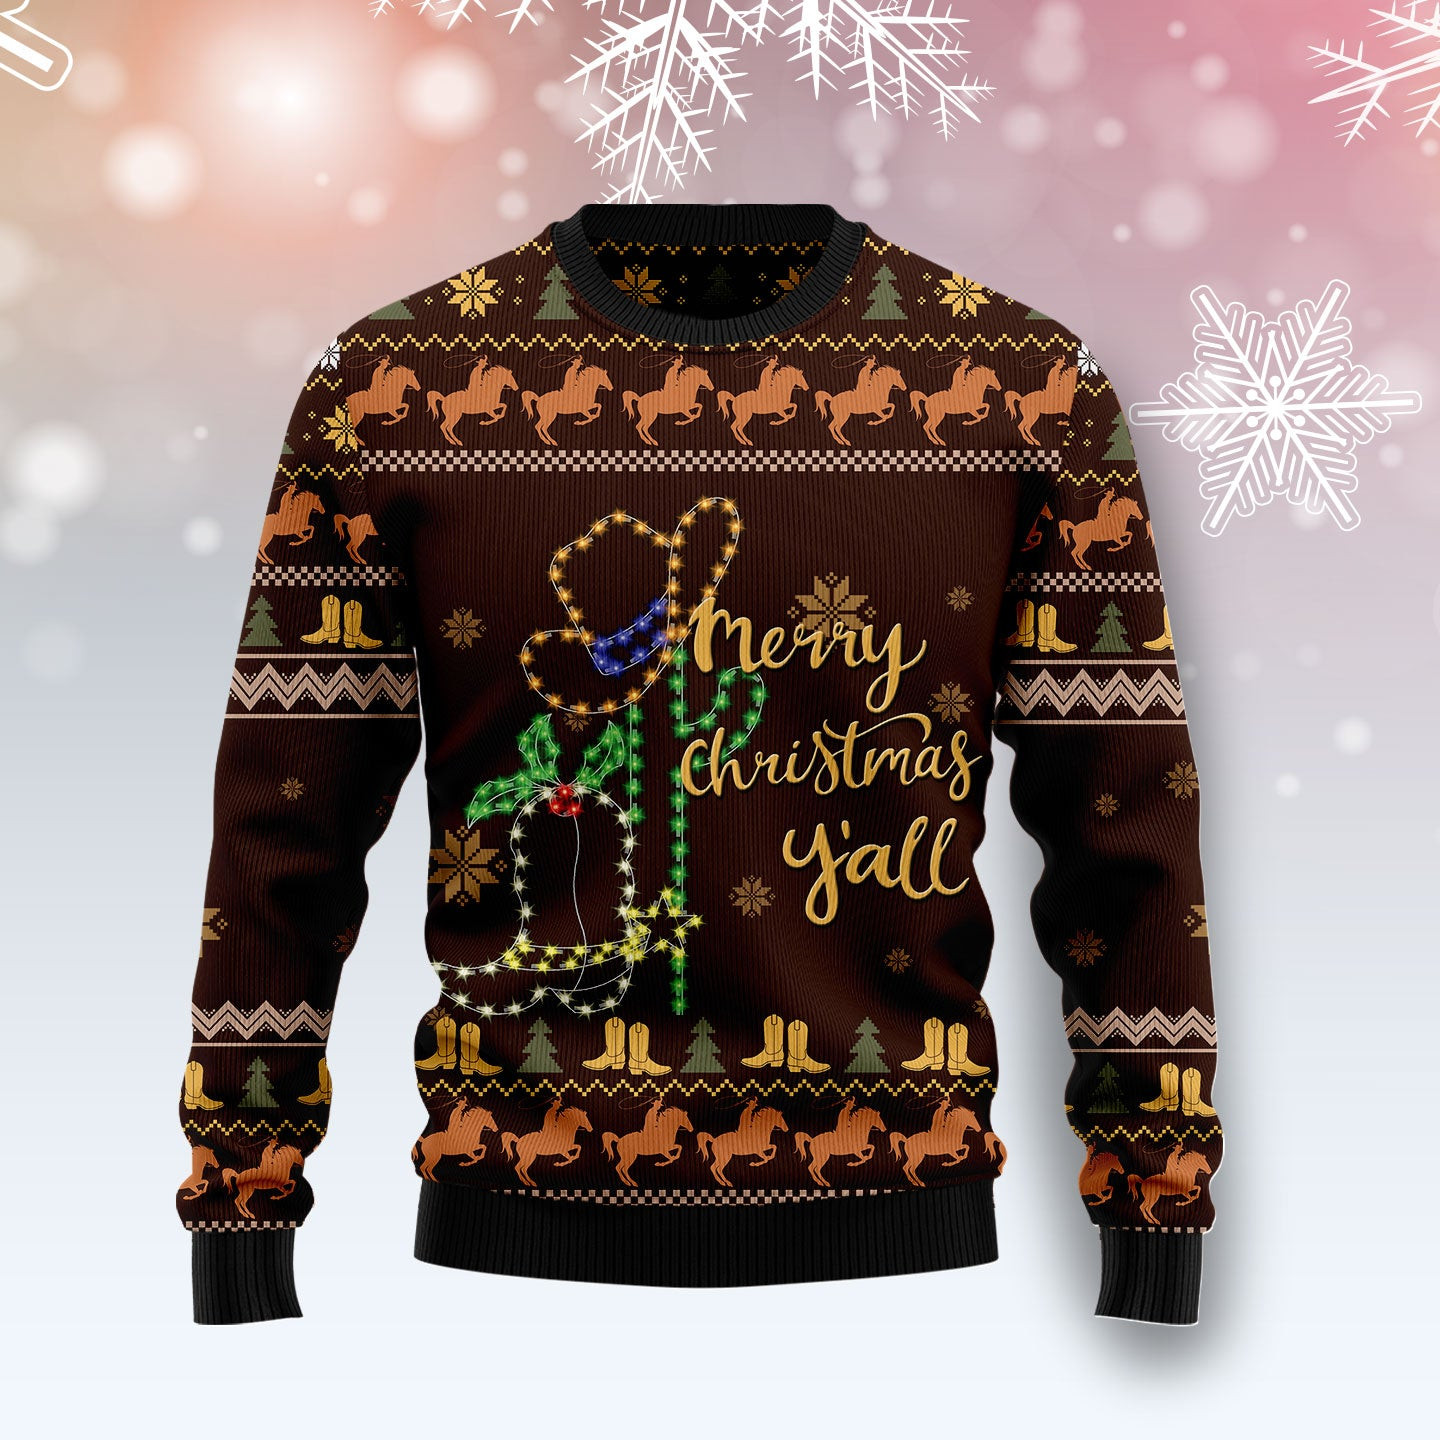 Cowboy Boots Christmas Ugly Christmas Sweater, Ugly Sweater For Men Women, Holiday Sweater